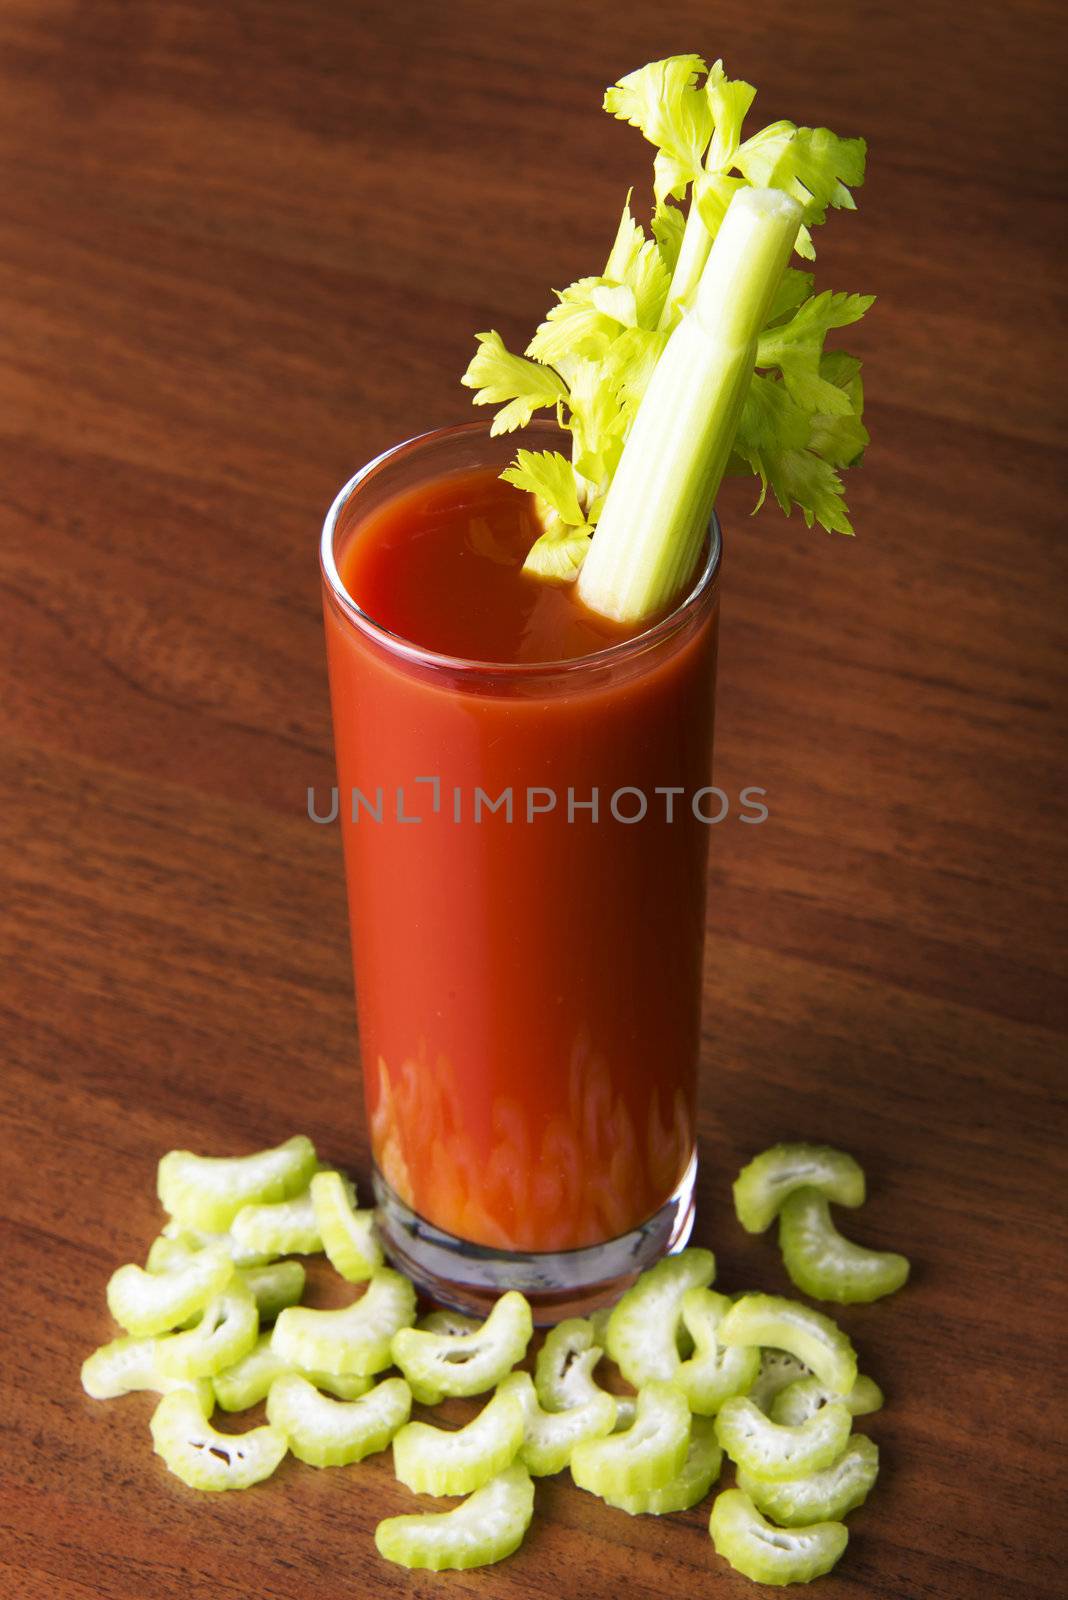 Tomato juice, bloody mary on table